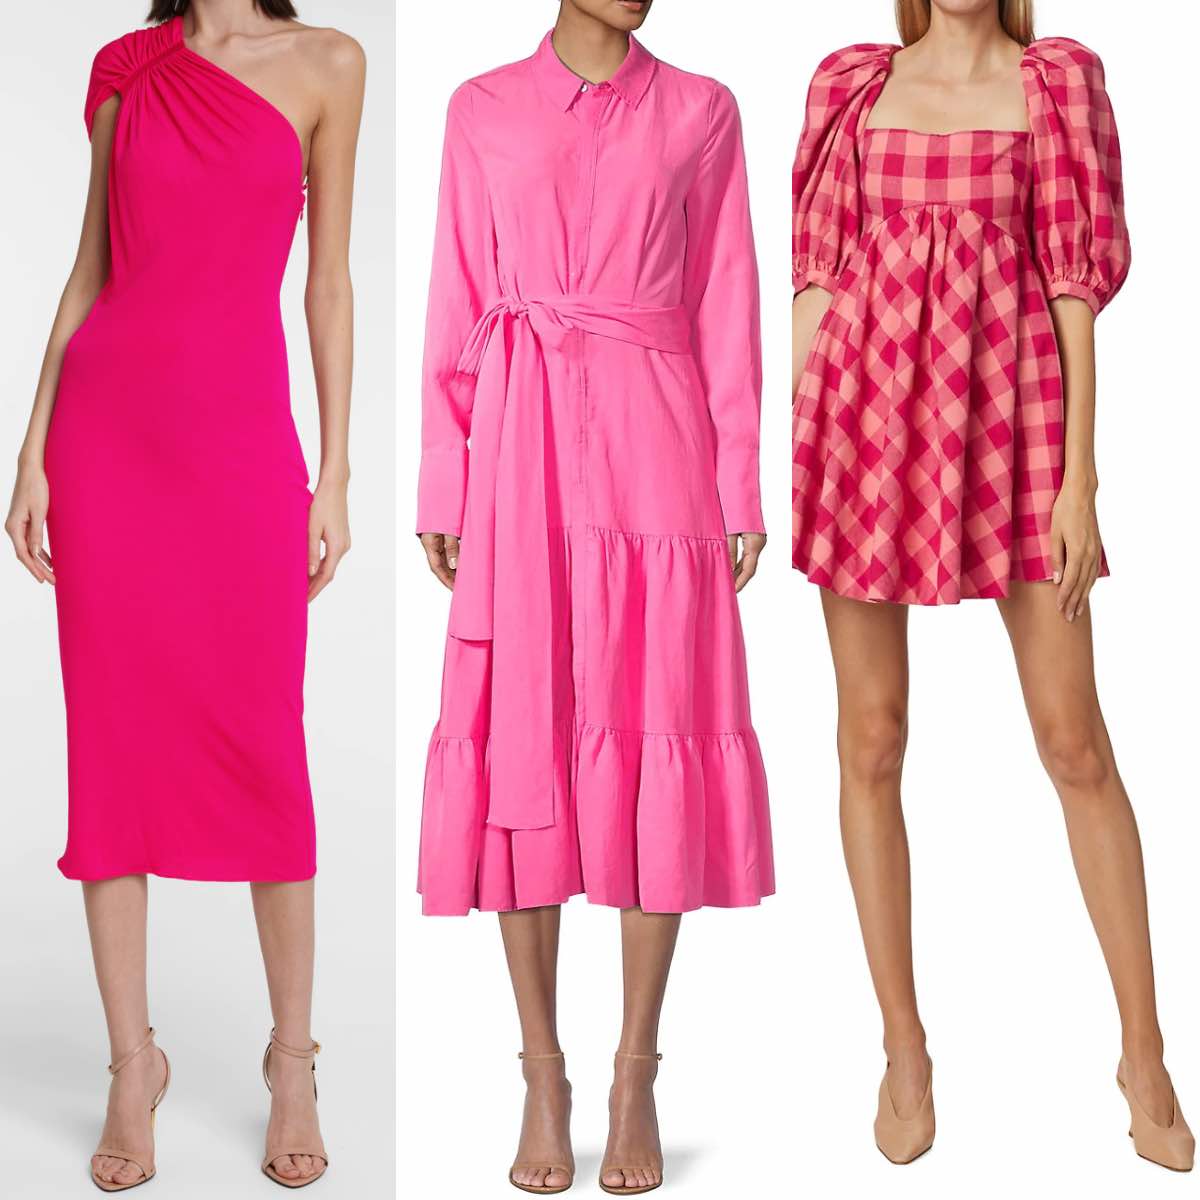 3 women wearing pink dresses with nude shoes